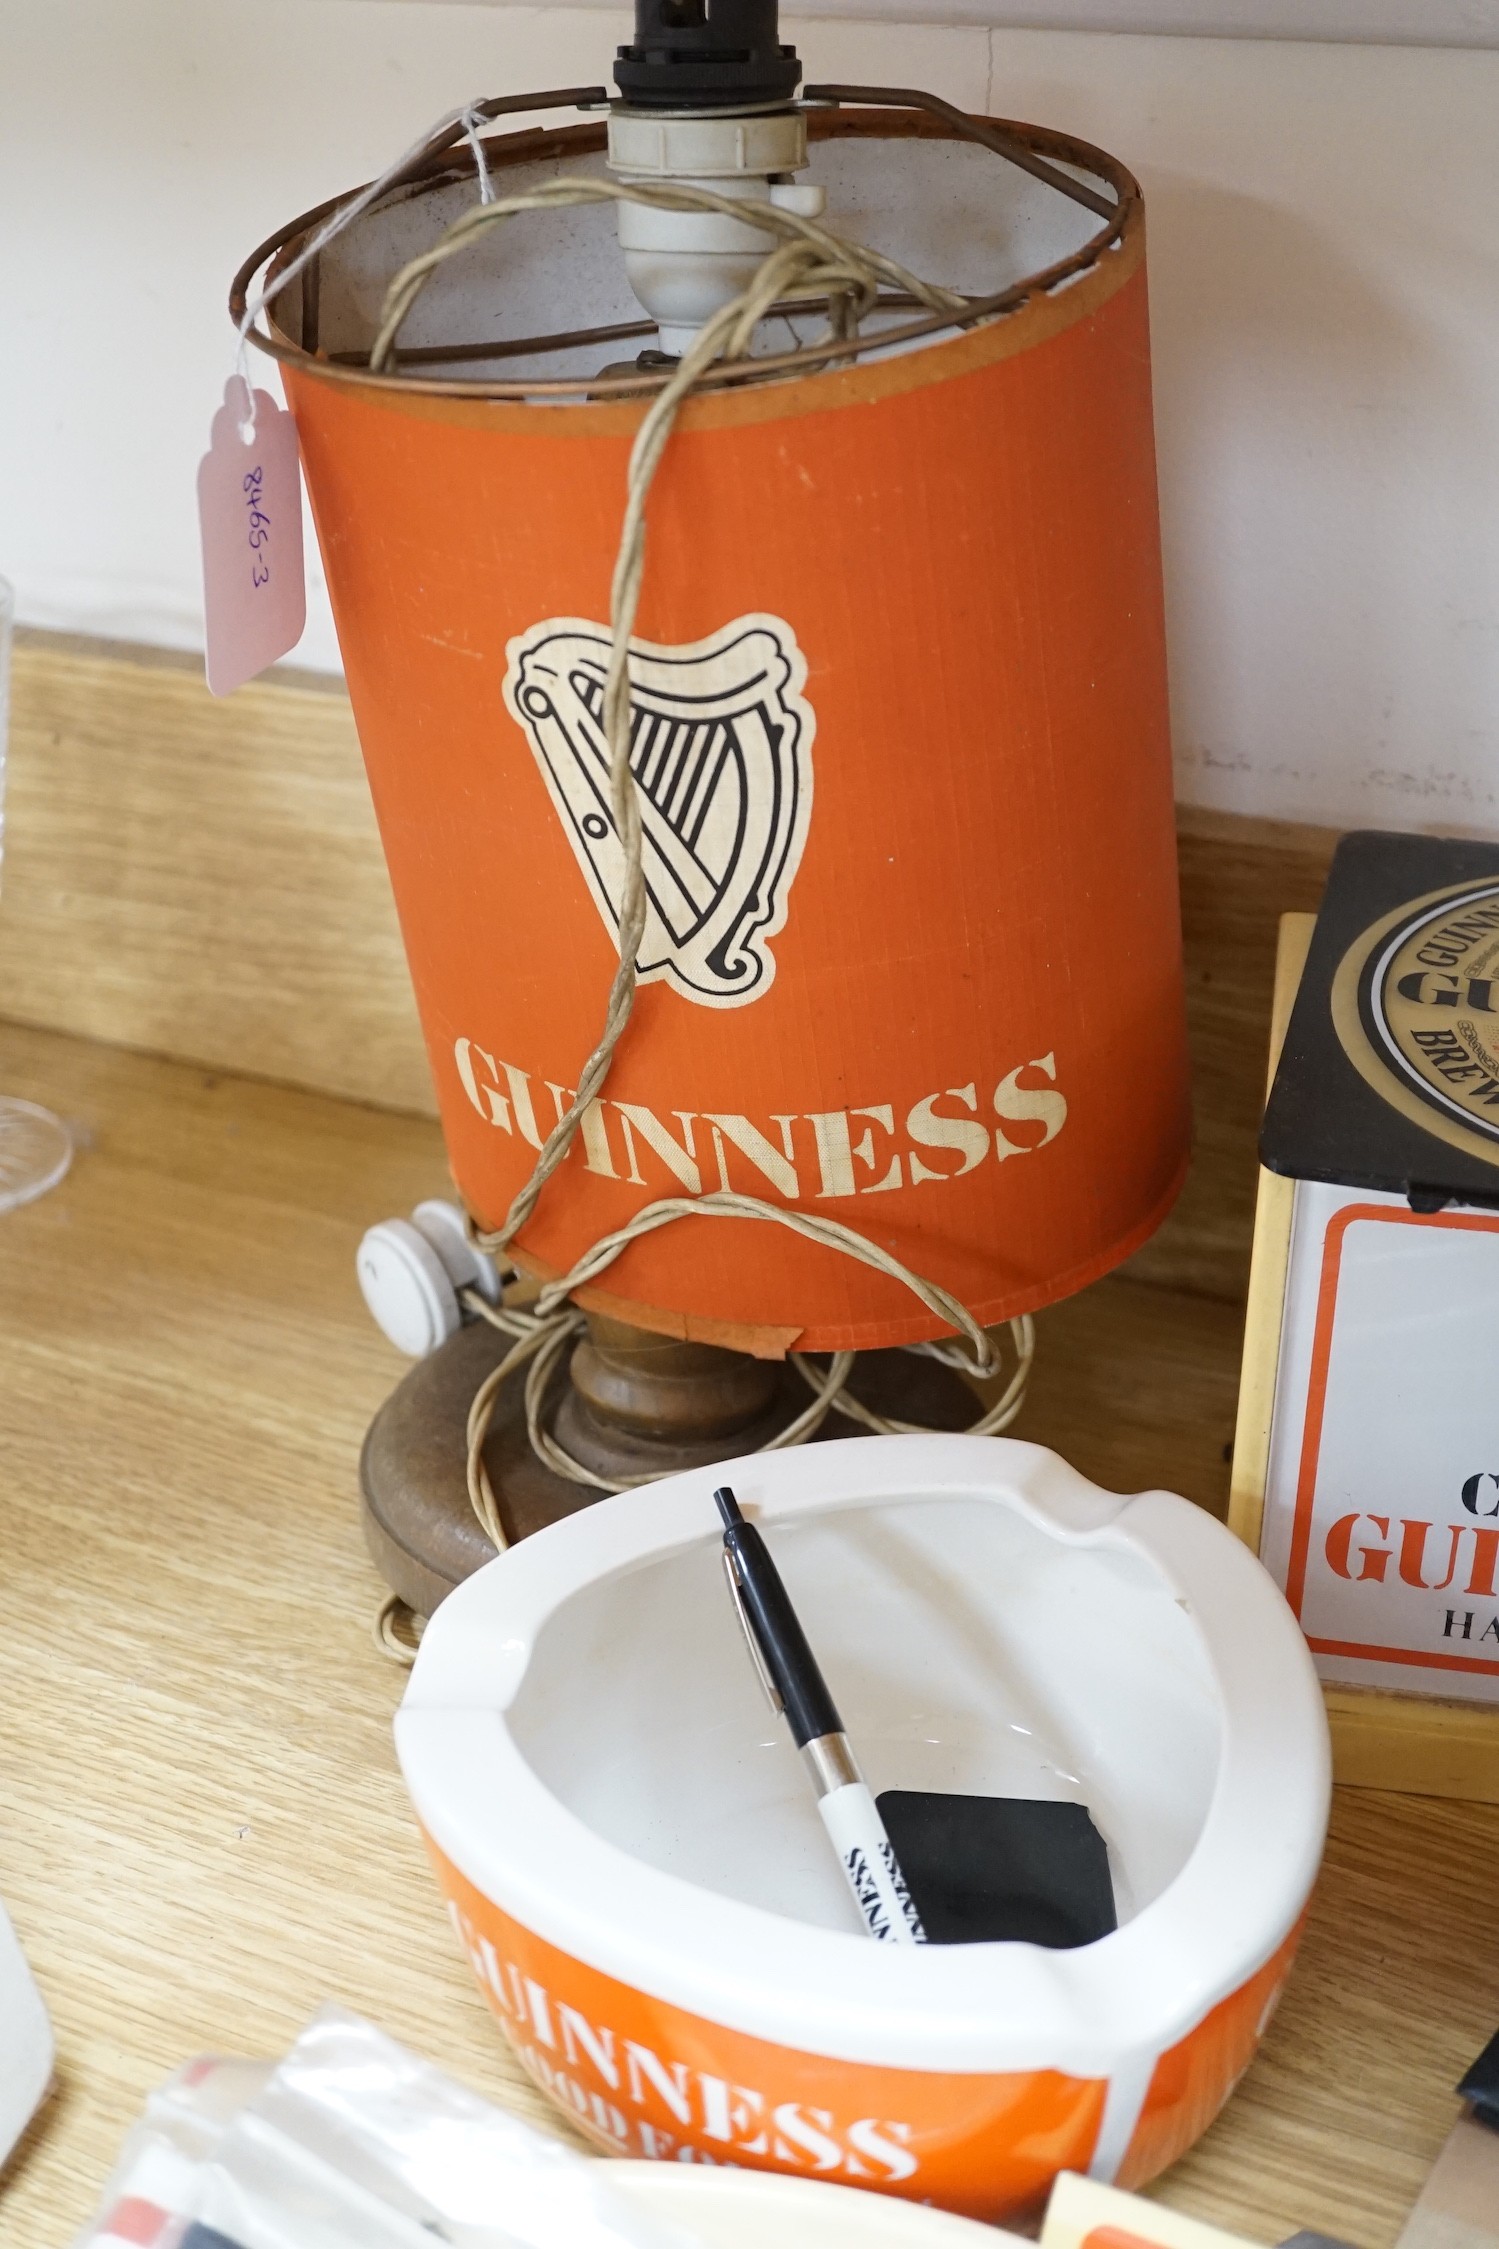 A large quantity Guinness advertising material, including a table lamp with Guinness shade, signage, bar mats, camera etc